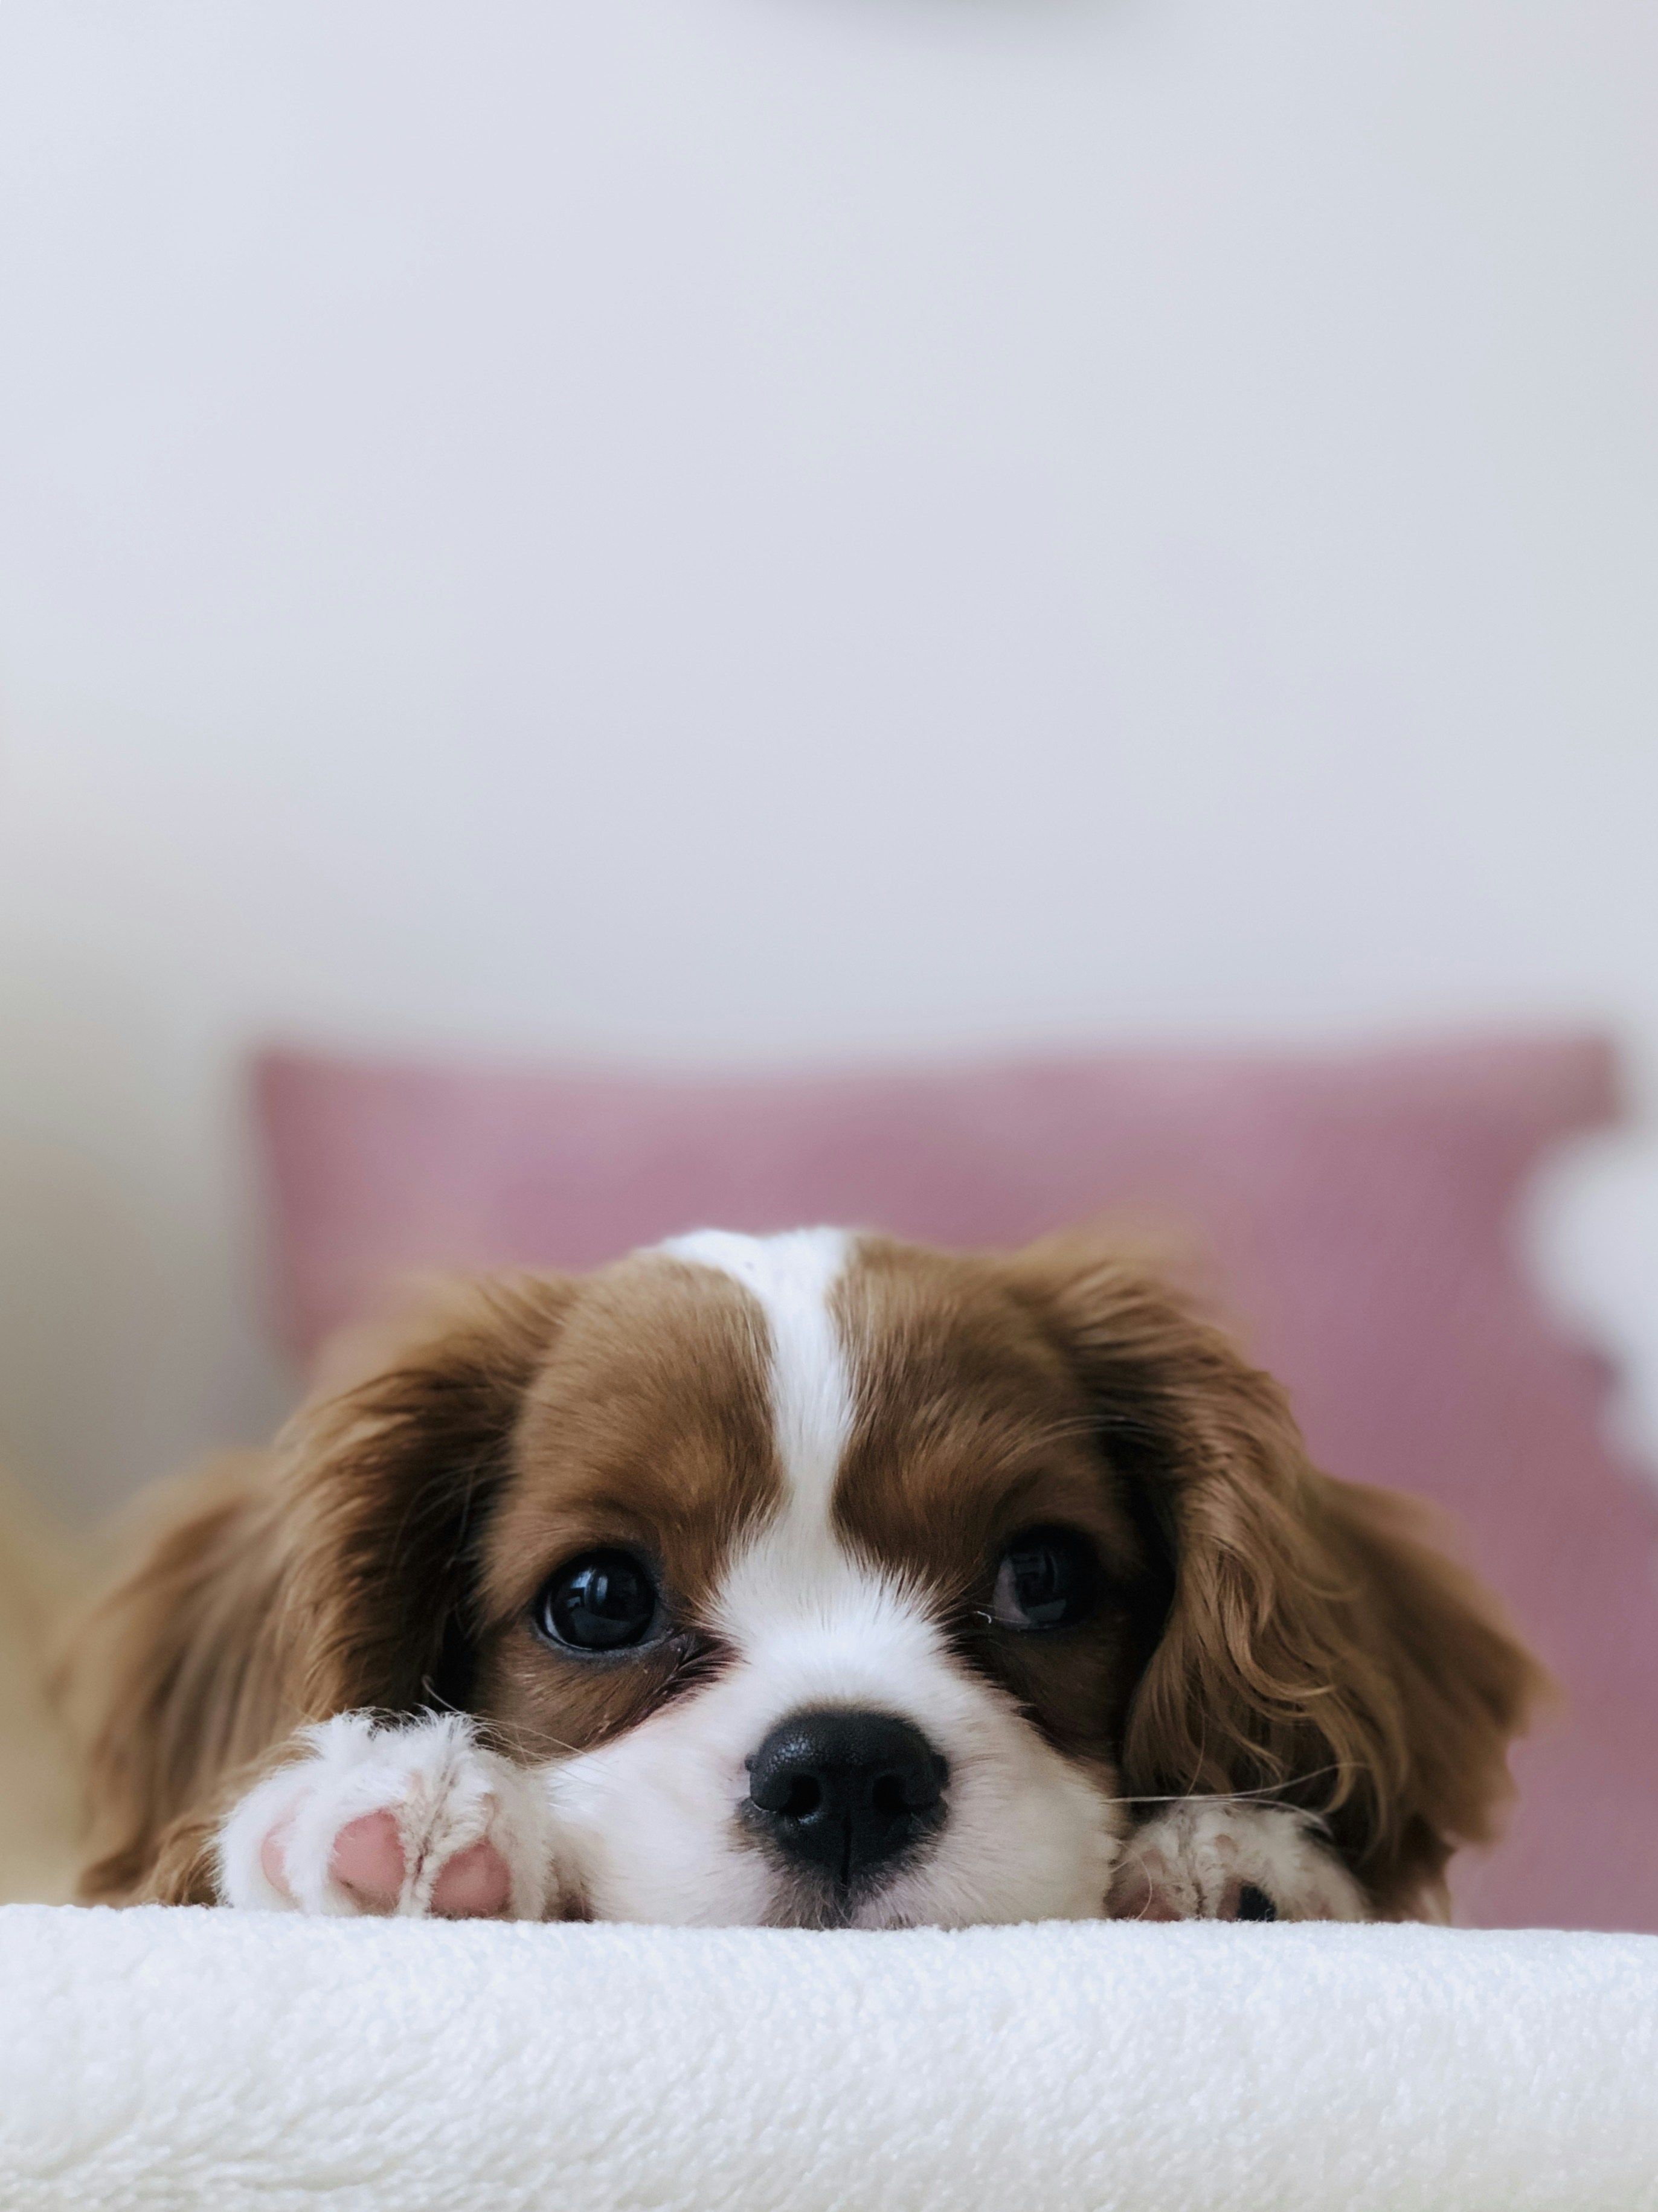 What Are Some Safe And Effective Methods For Potty Training A Puppy Indoors?